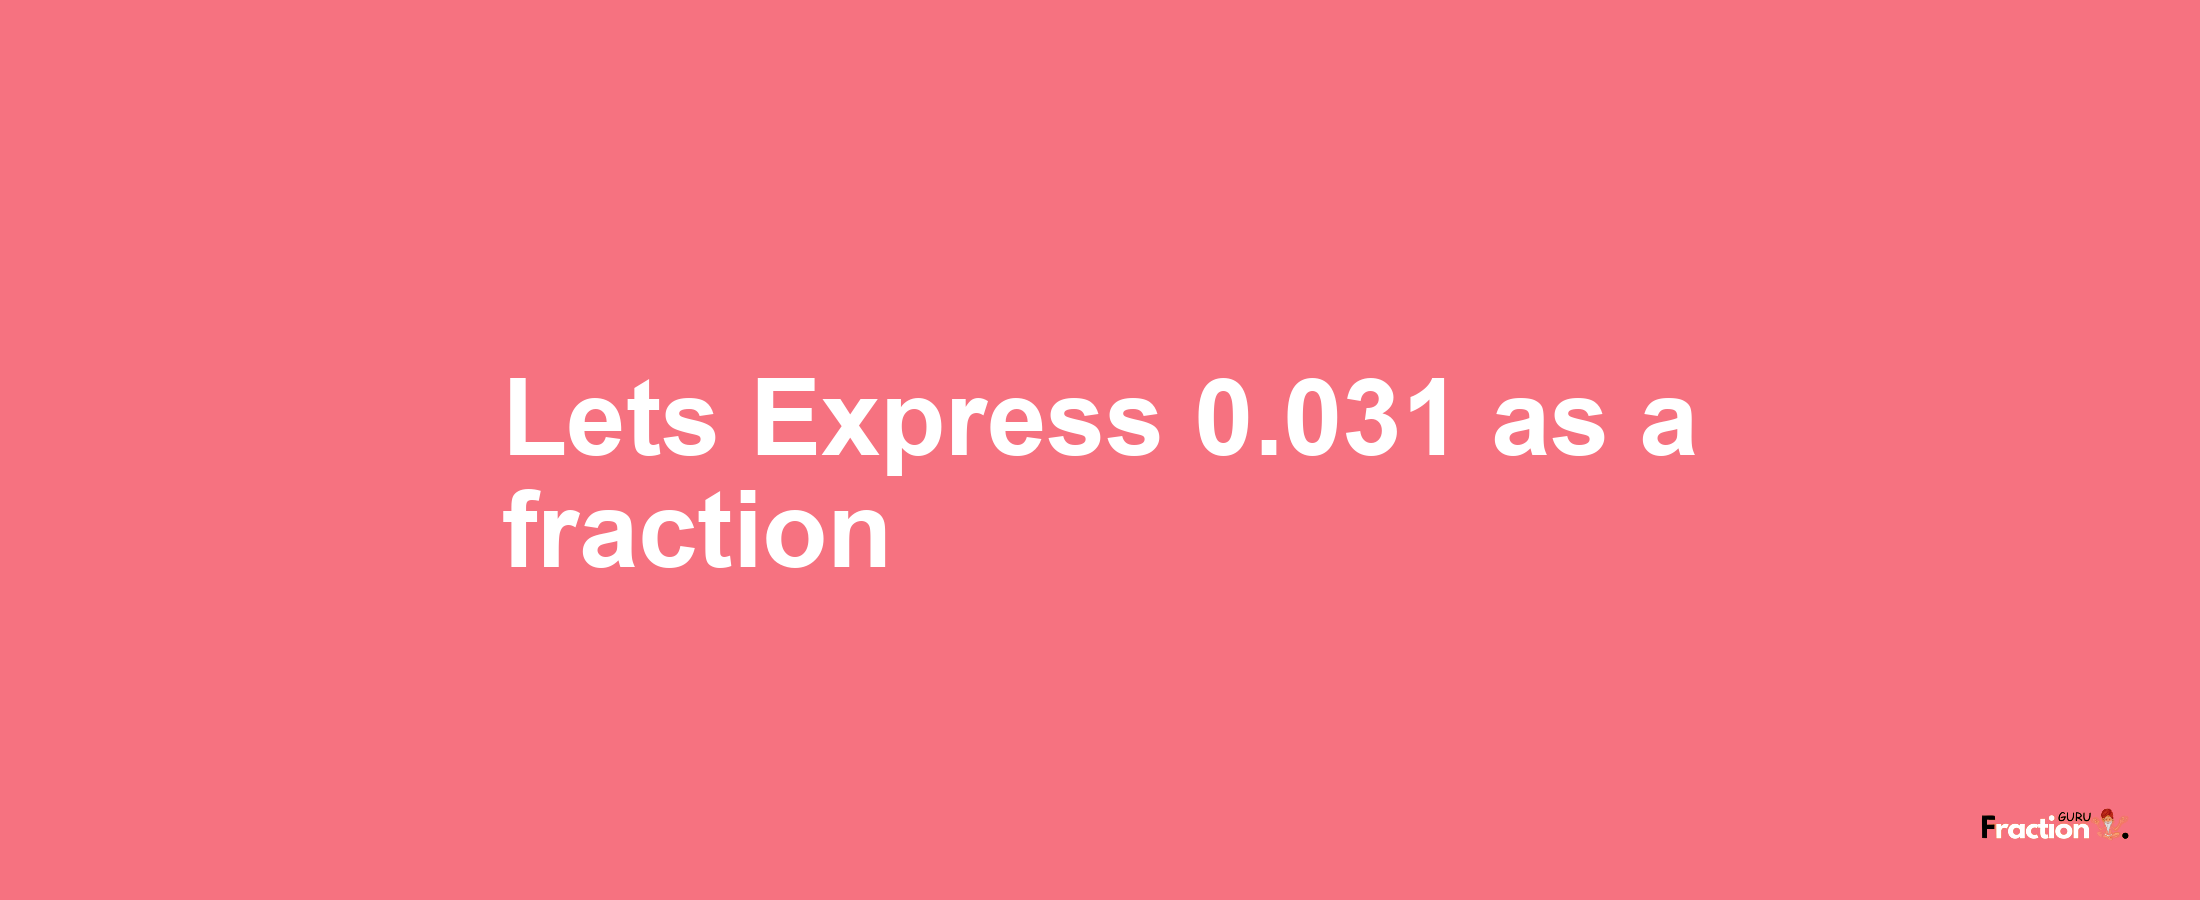 Lets Express 0.031 as afraction